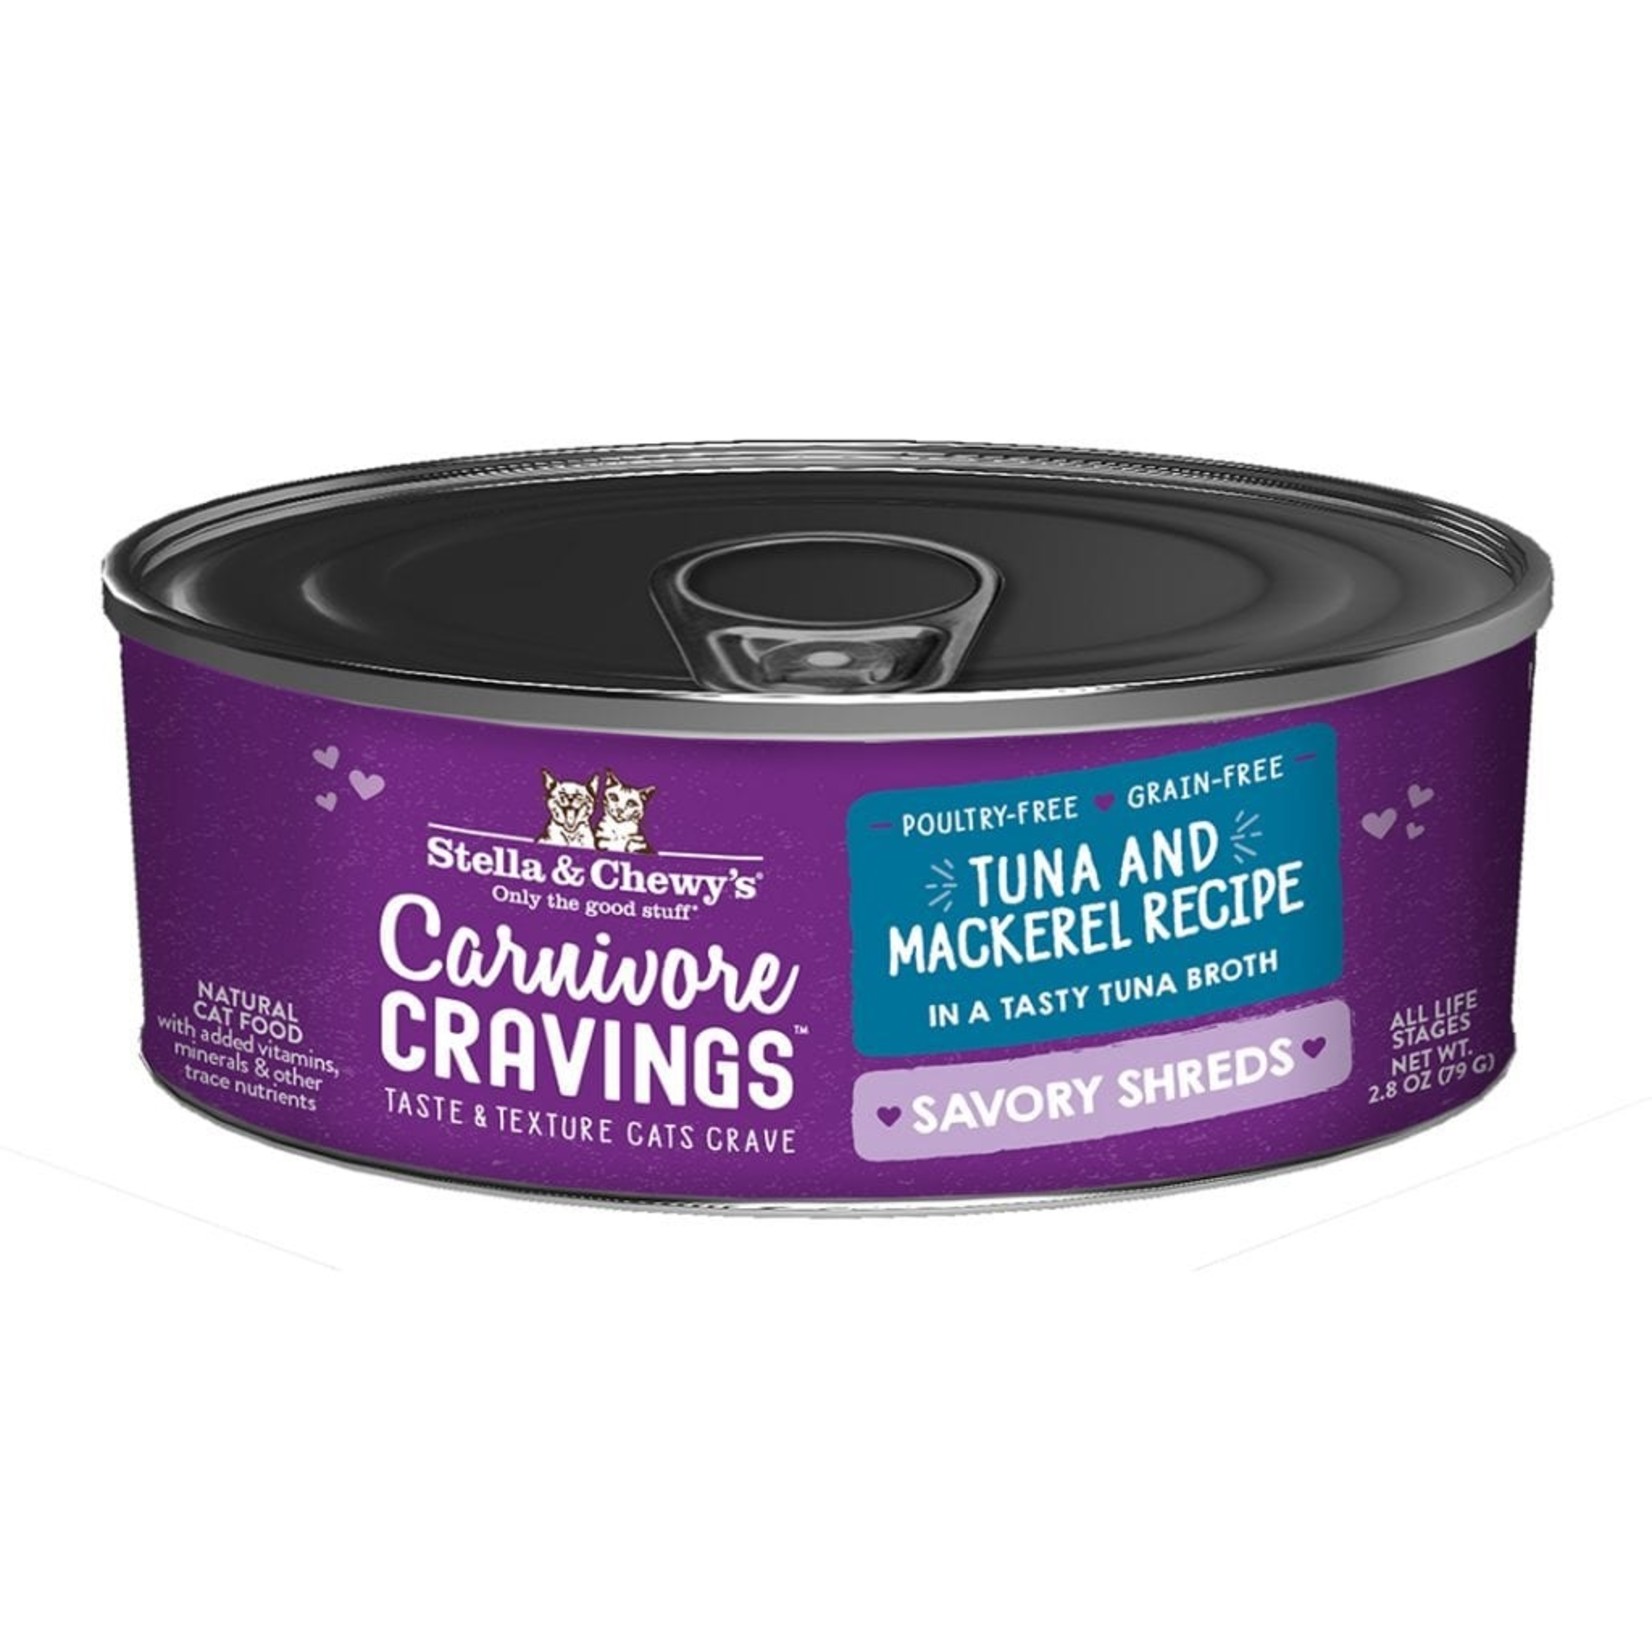 Stella and Chewys Stella & Chewy's Wet Cat Food Carnivore Cravings Savory Shreds Tuna & Mackerel Recipe 2.8oz Can Grain Free